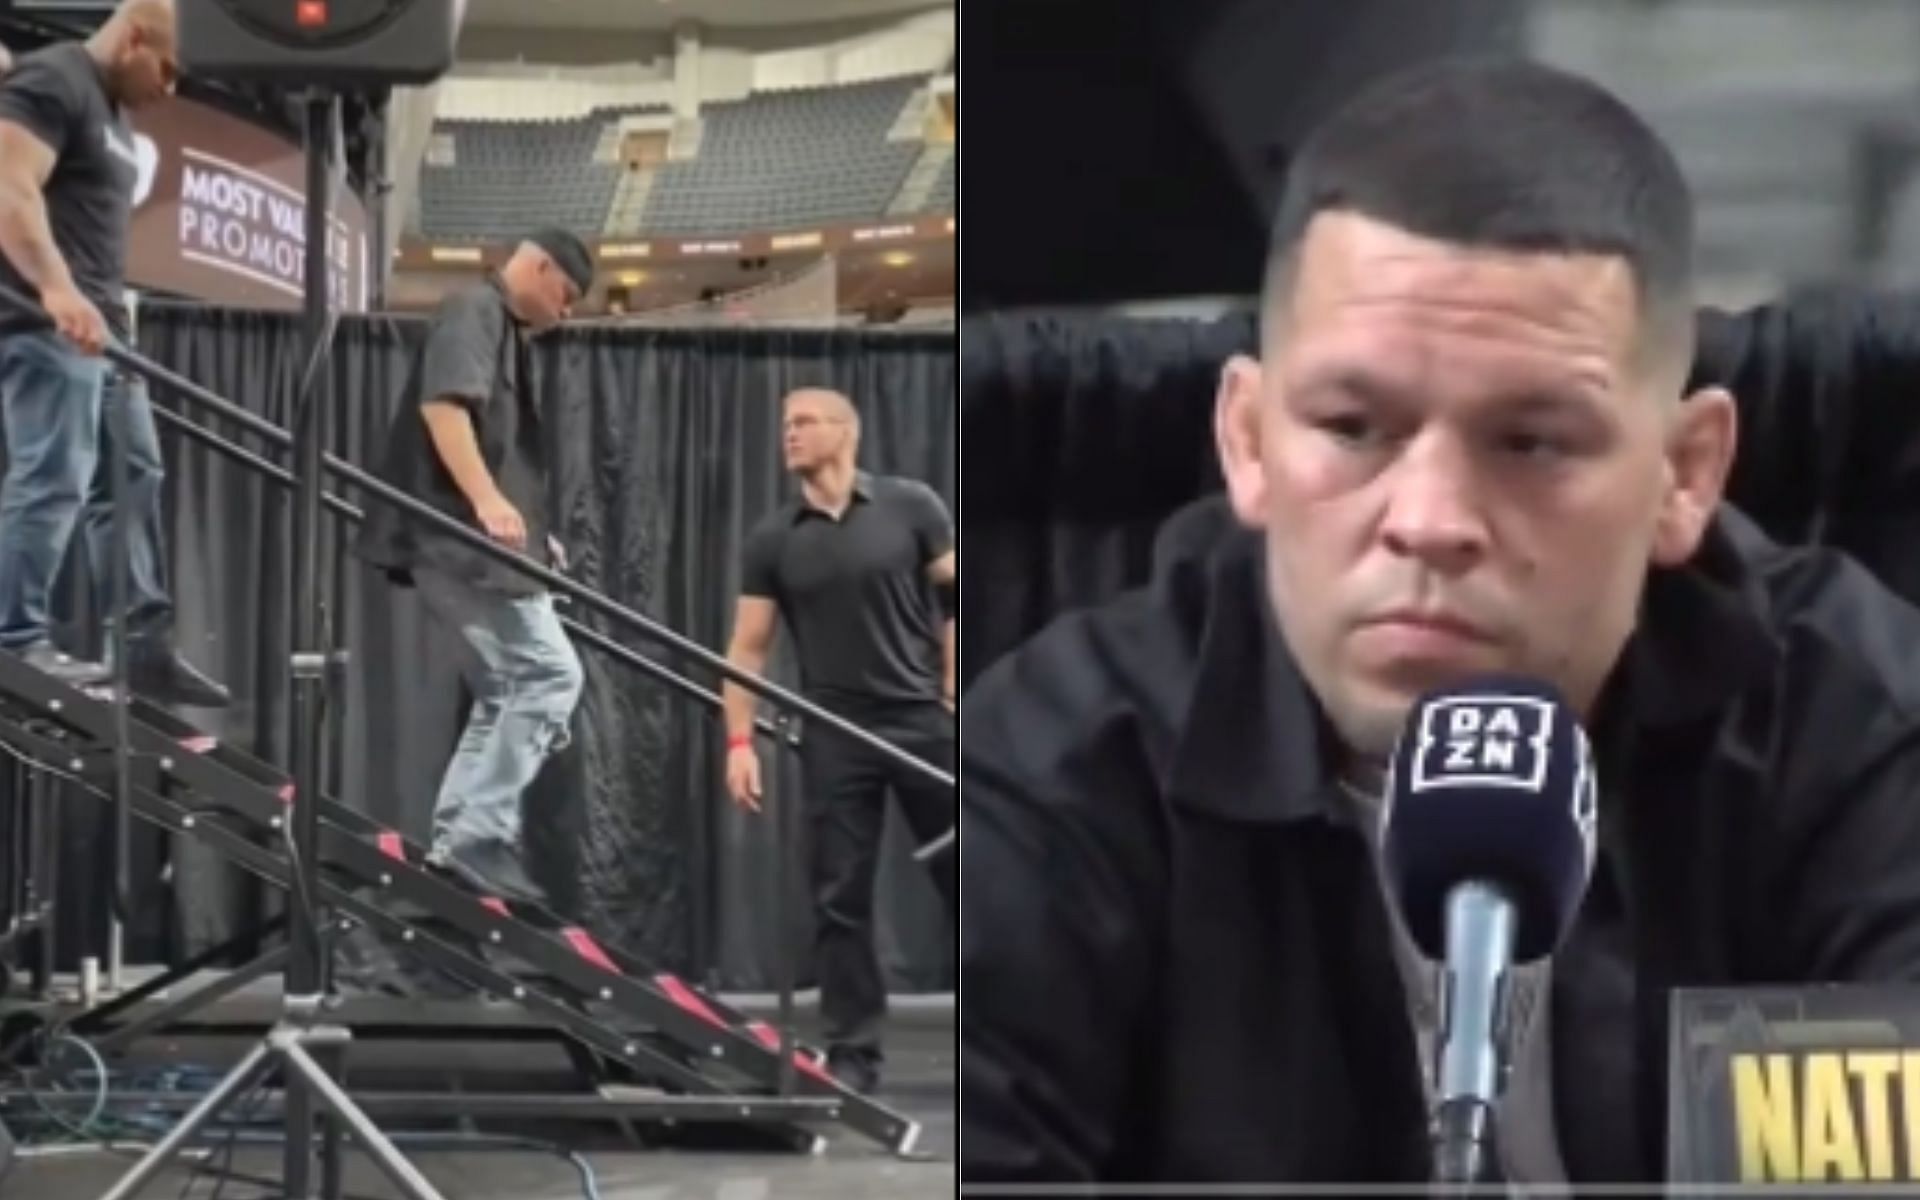 Nate Diaz took a toilet break during the Paul vs. Diaz press conference [Image credits: @twrecks15 and @BloodyElbow on Twitter]